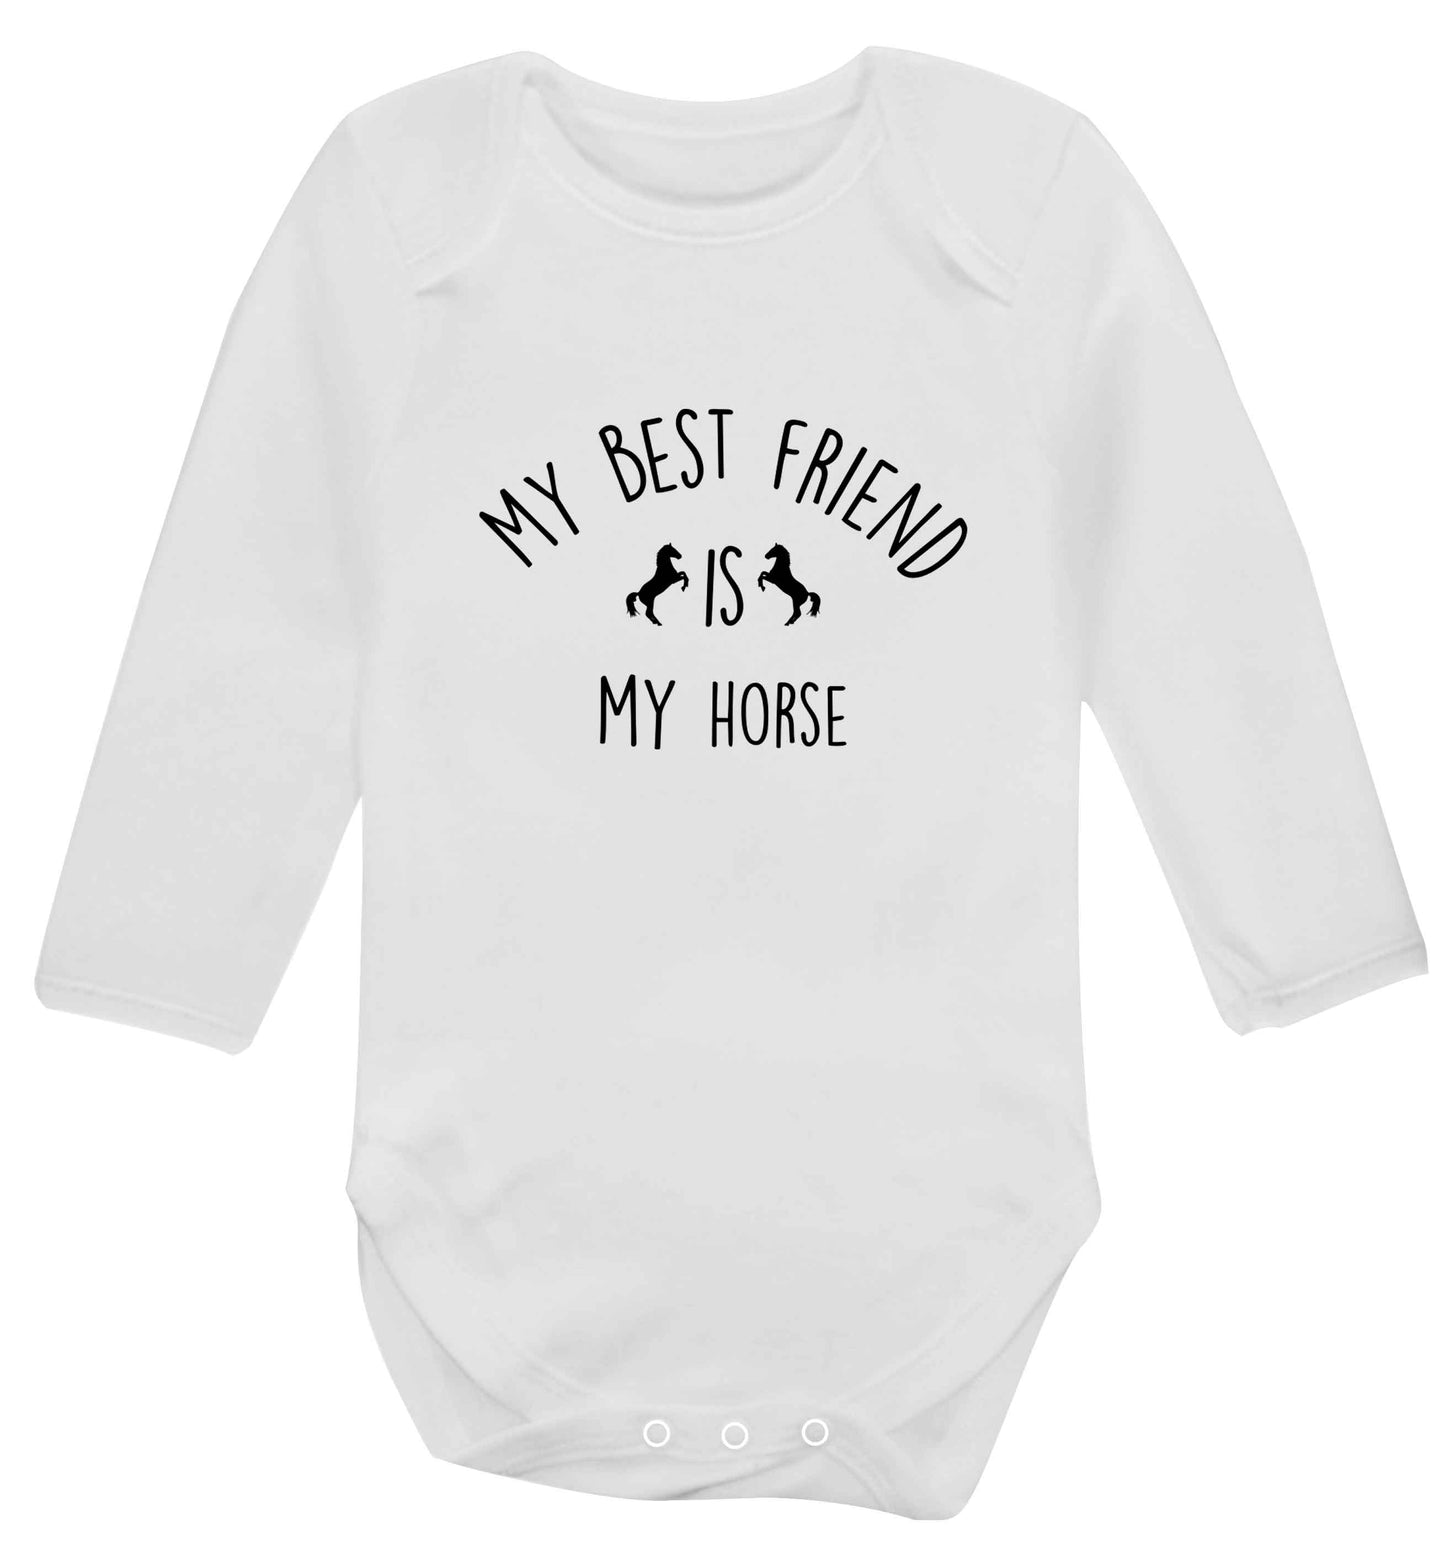 My best friend is my horse baby vest long sleeved white 6-12 months